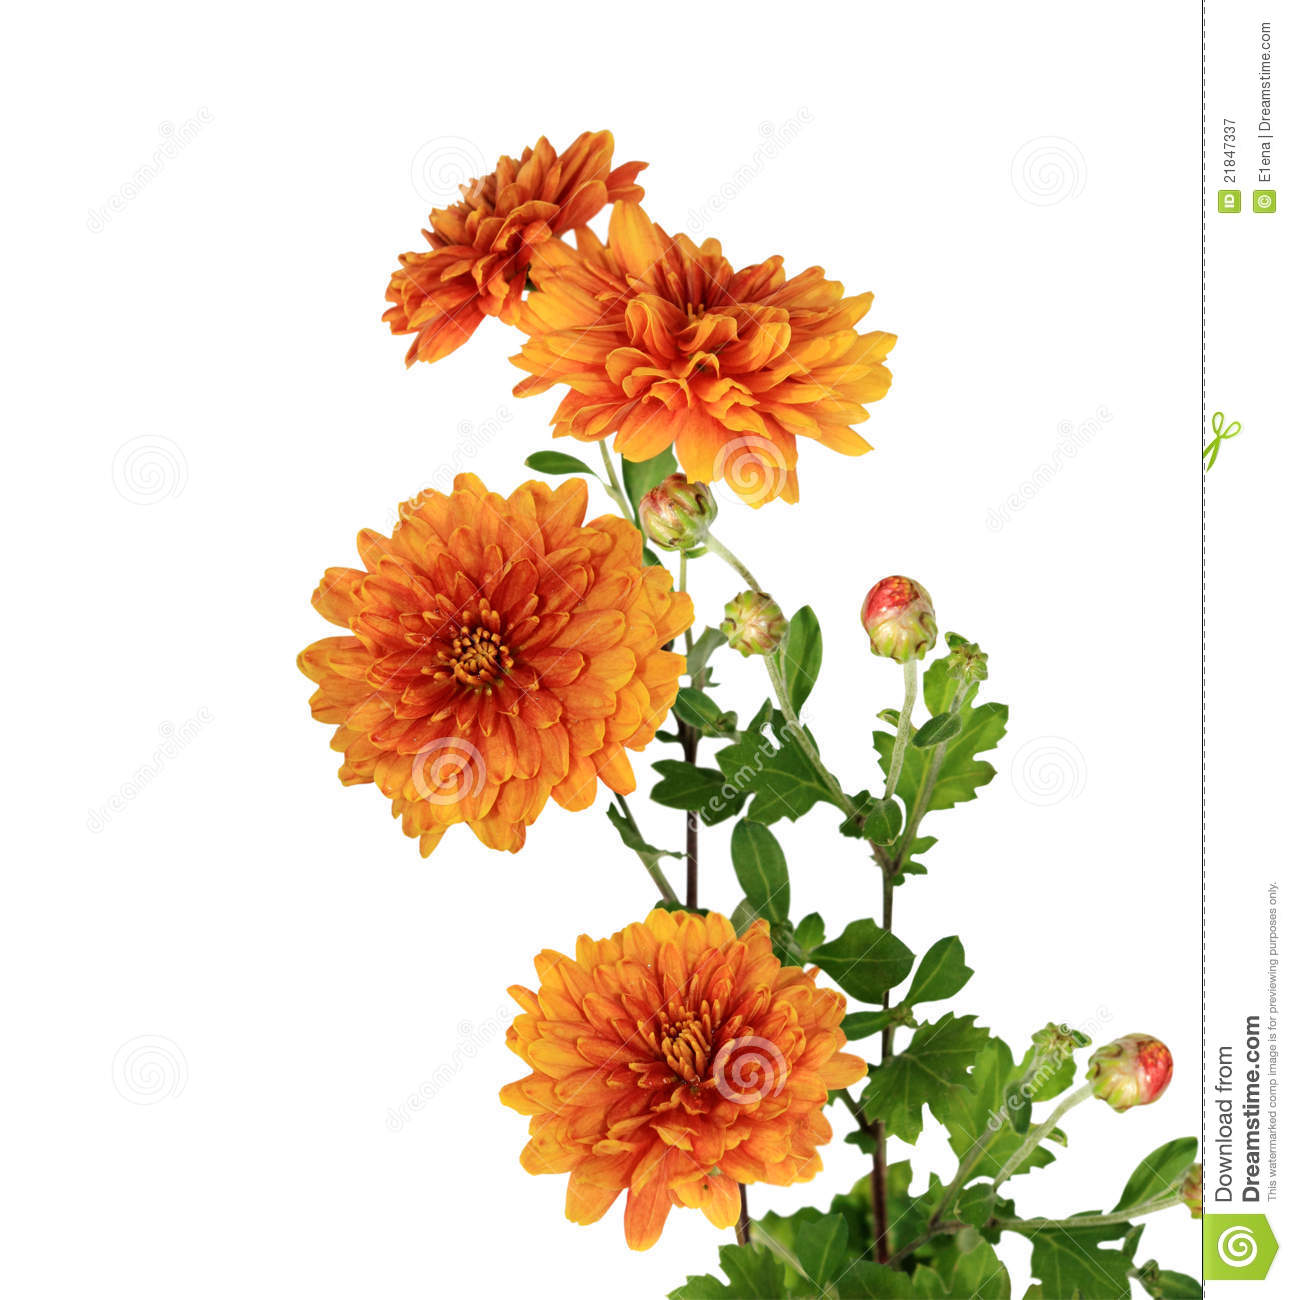 Chrysanthemums clipart - Clipground